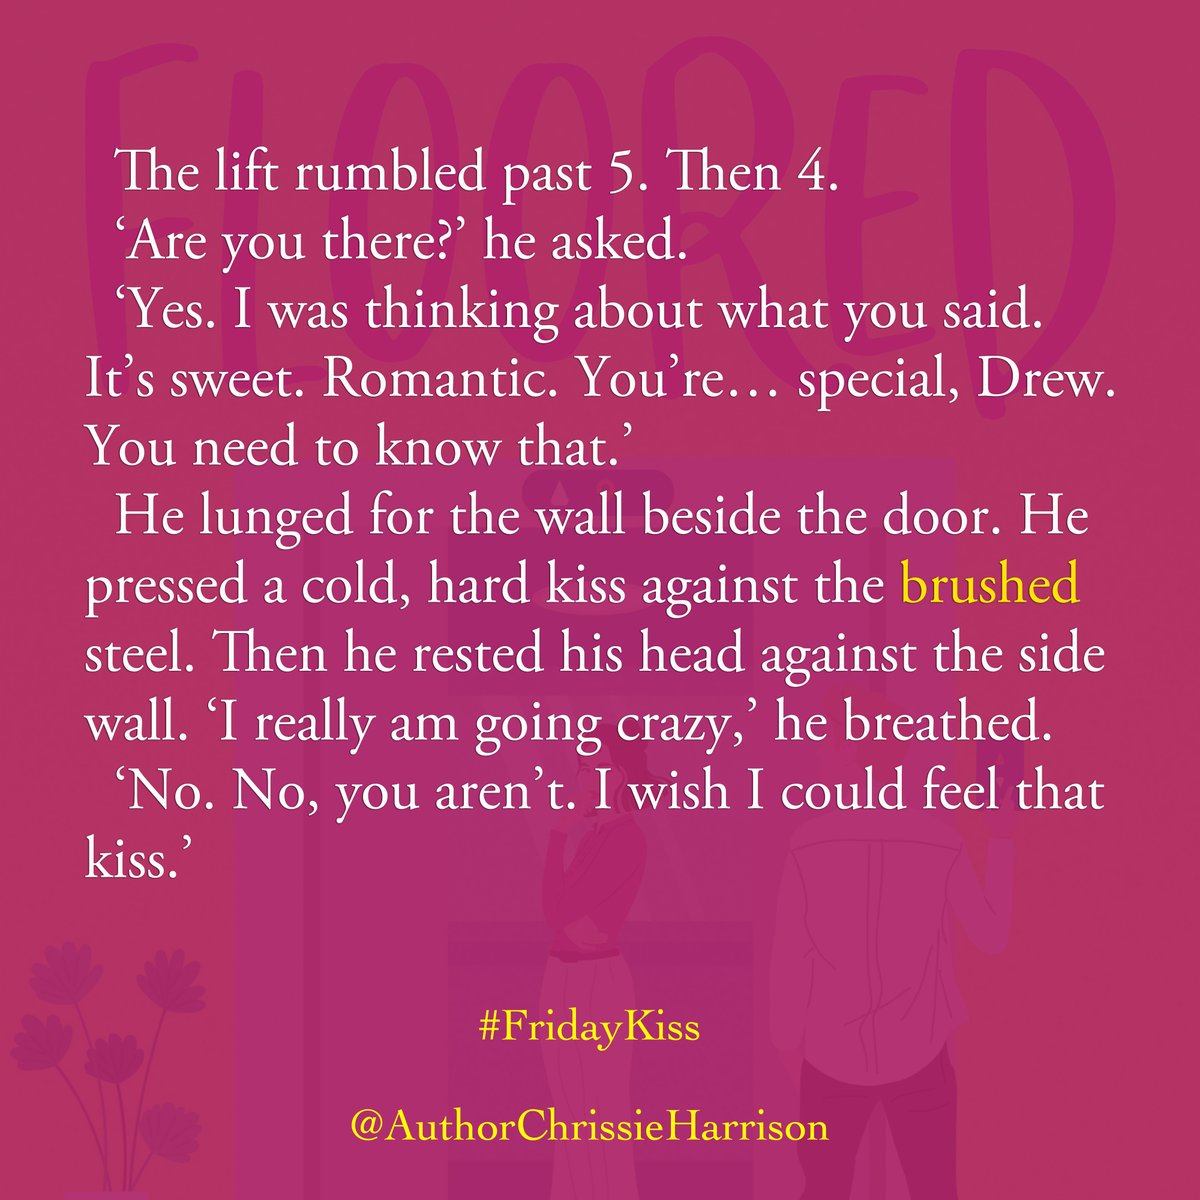 This week’s #FridayKiss theme is “brush”.
Things start to get physical between Drew and the lift—or at least the voice in the lift—he’s starting to fall for…

Why not discover FLOORED, the charming, funny and sweet #RomCom guaranteed to give you a lift.

☆☆☆☆☆ “Brilliant”